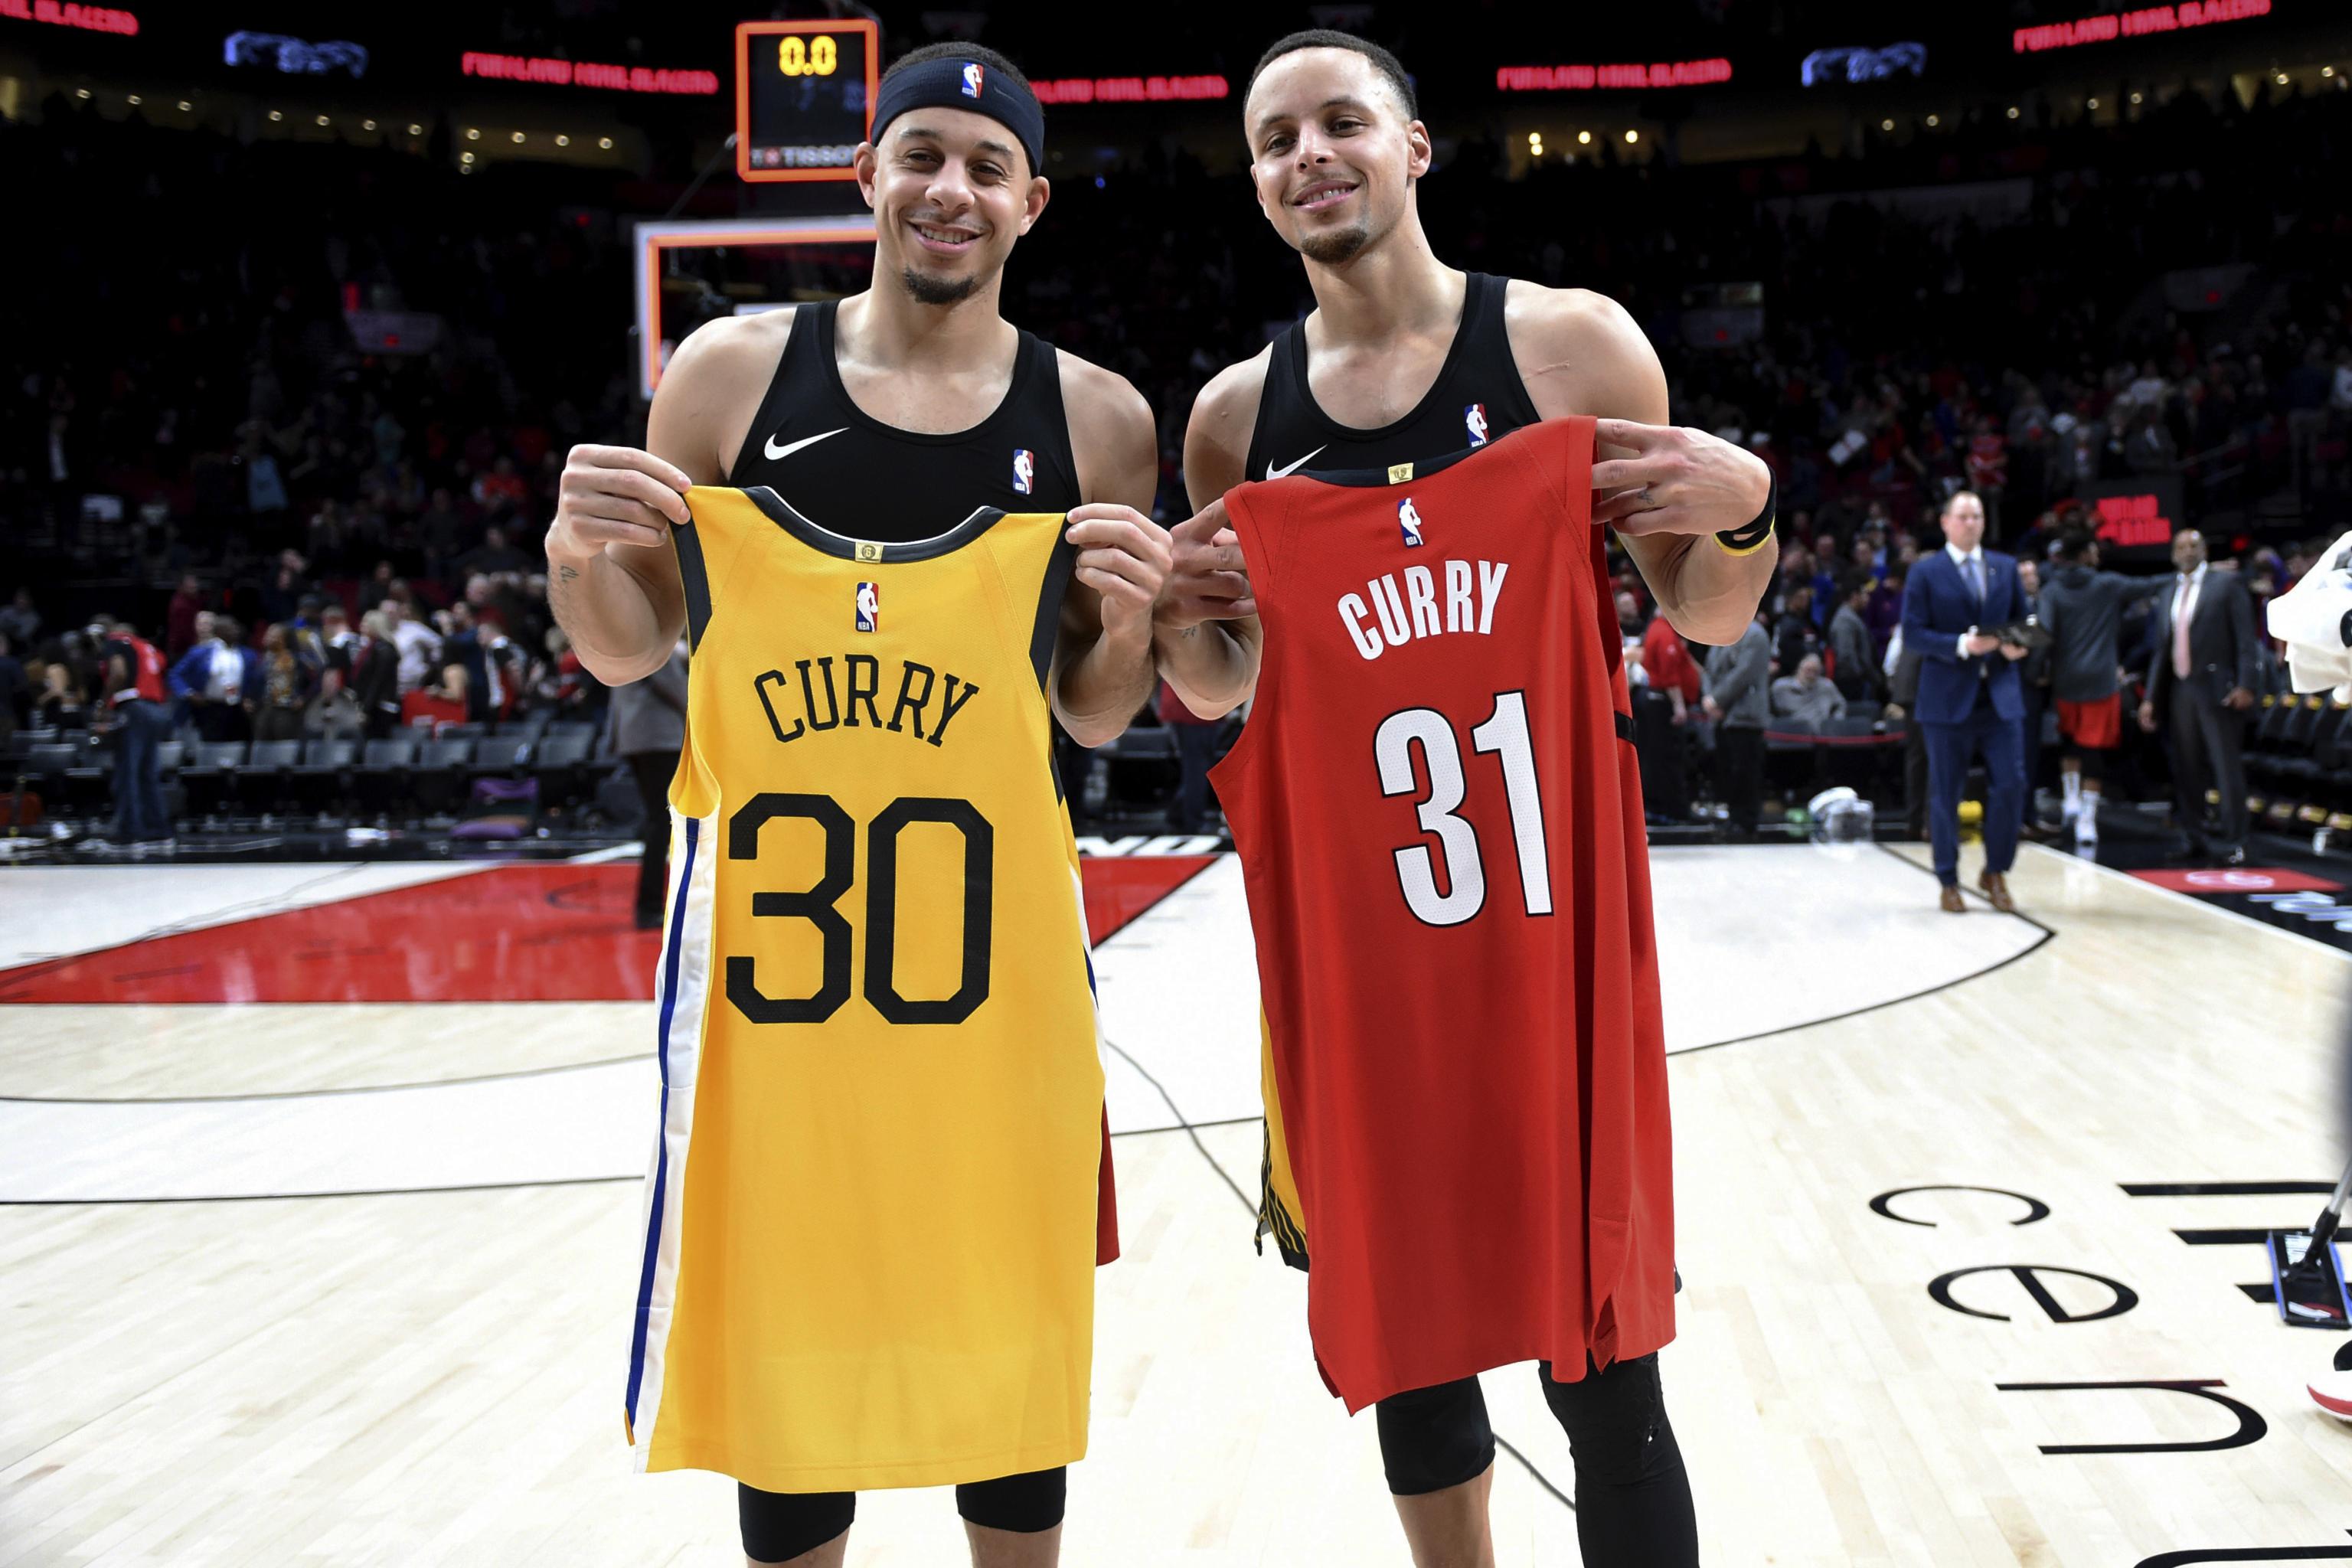 Video Watch Steph Seth Curry S Parents Flip Coin For Who To Root For In Wcf Bleacher Report Latest News Videos And Highlights